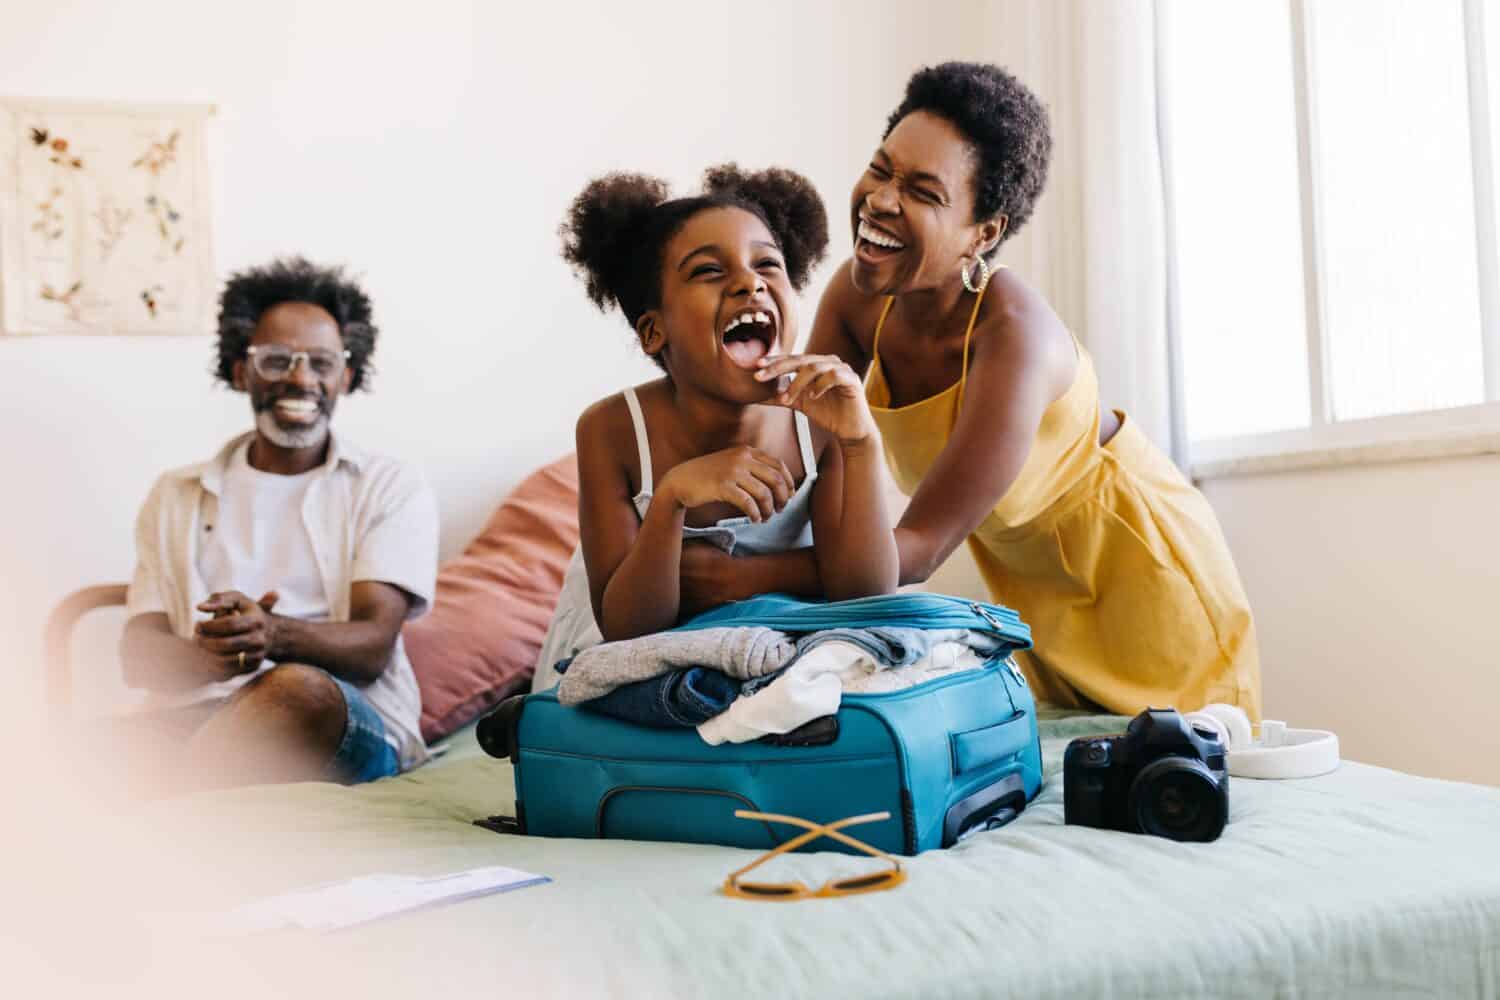 Happy family preparing for a vacation, laughing together as they pack travel essentials. Parents, along with their excited daughter, enjoy  planning and getting ready for a fun-filled holiday.